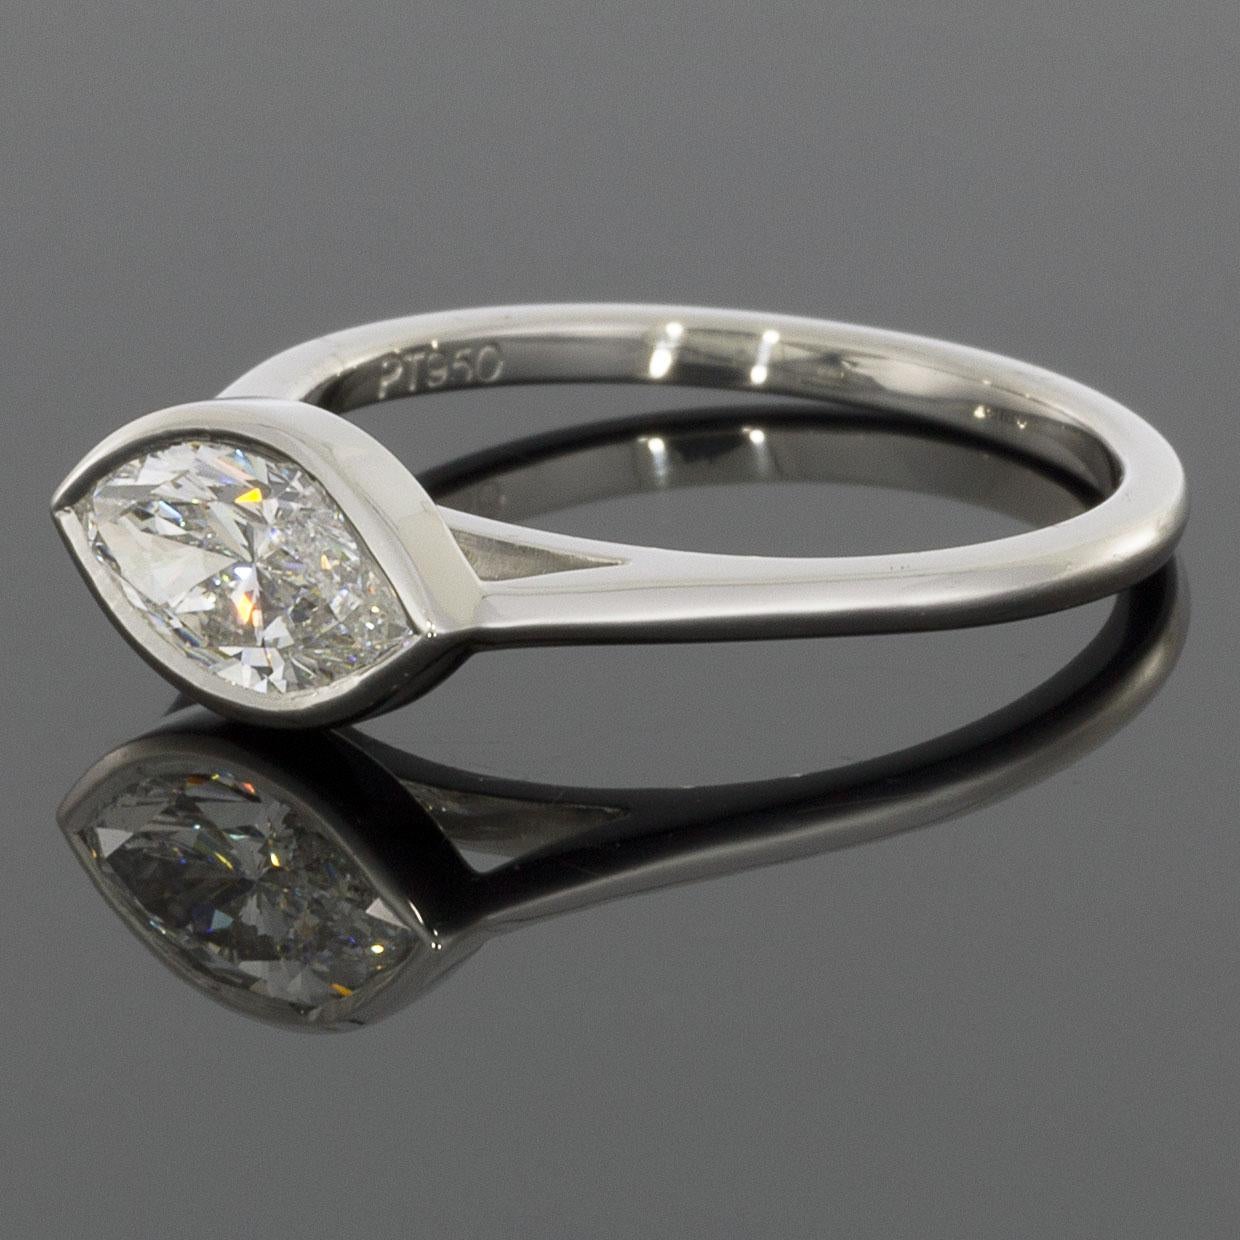 Item Details:
Estimated Retail - $8,000.00
Metal - Platinum
Total Carat Weight (TCW) - 1.00 ct
Certification/Grading - Yes
Style - Solitaire
Ring Size - 6.50
Sizable - Yes
Metal Purity - 950 Platinum

Stone 1 Information:
Stone Type - Diamond
Stone